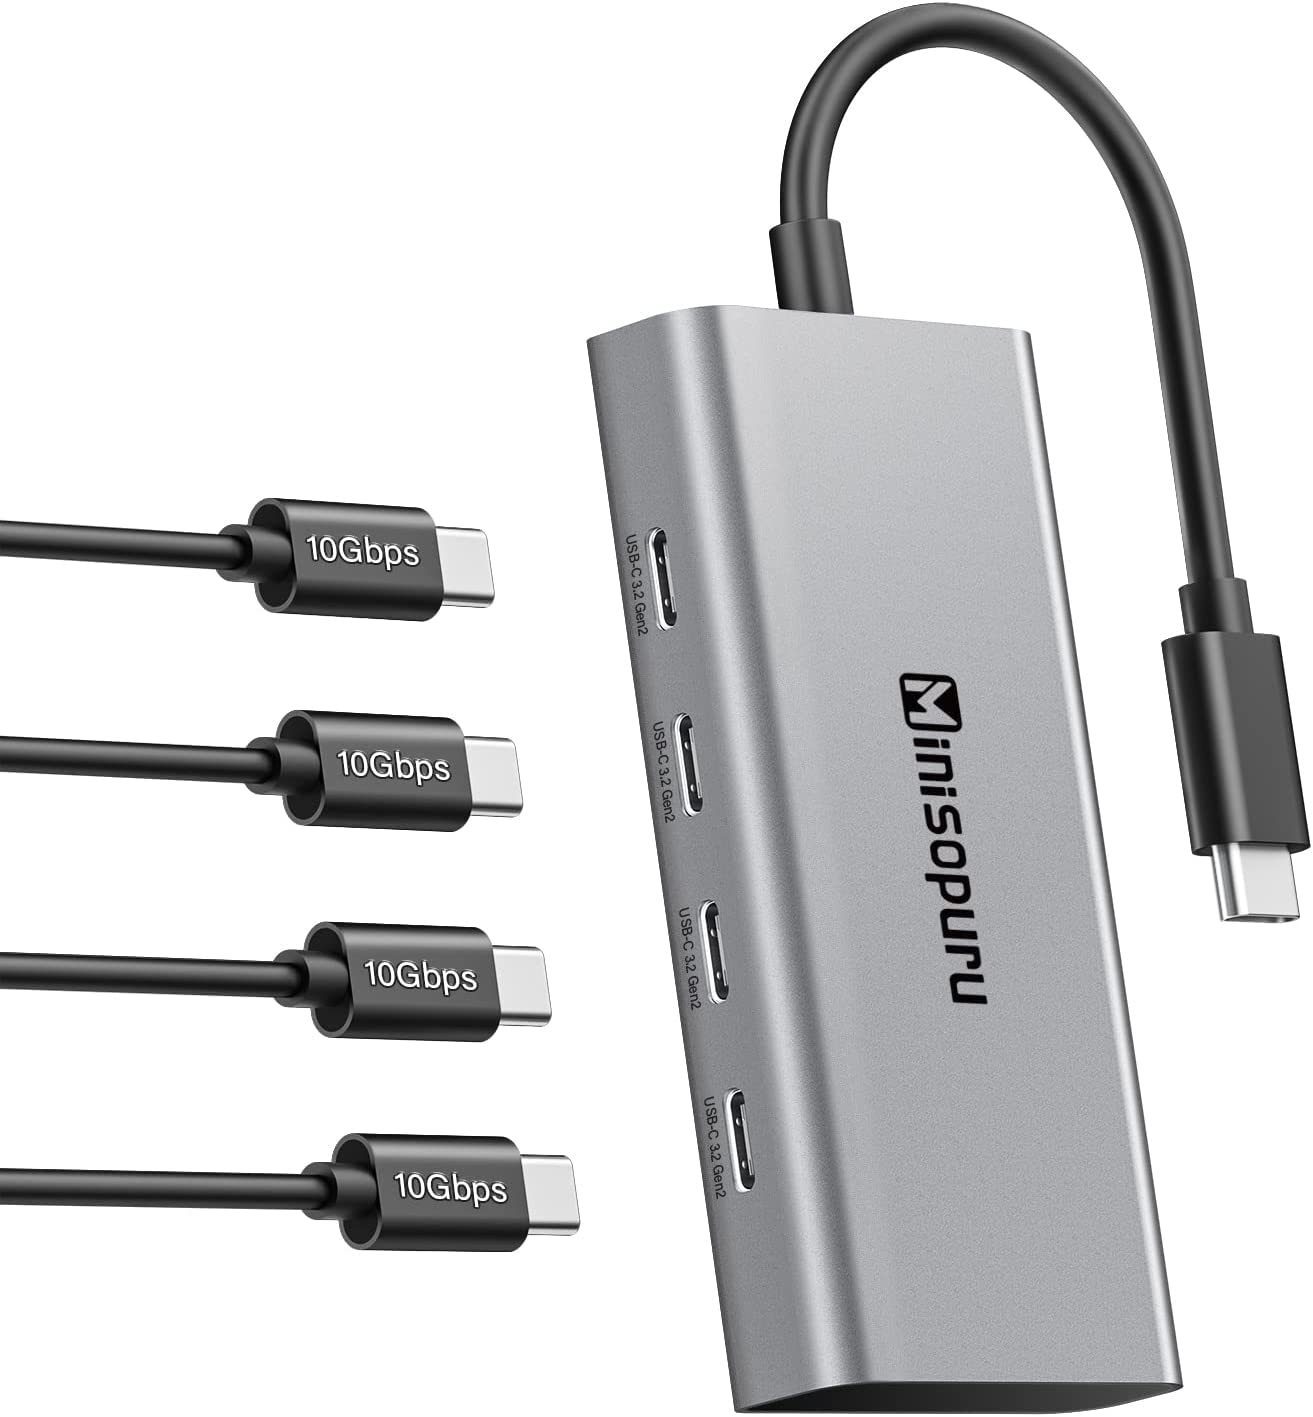 Buy USB C Hub at Best Prices Online for Macbook